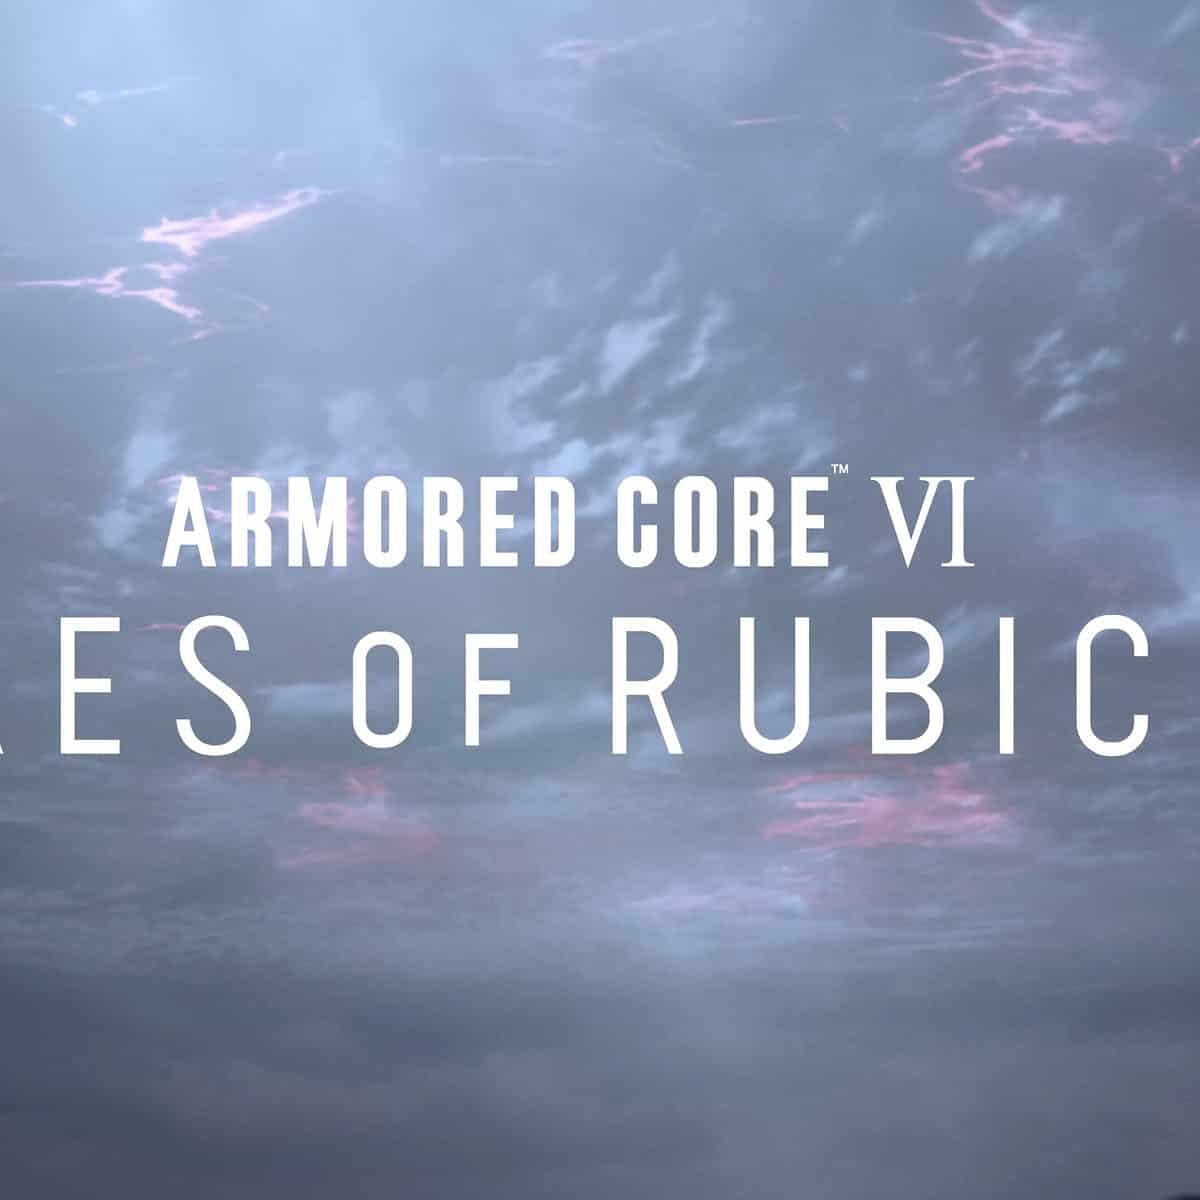 Buy Armored Core VI: Fires of Rubicon - Collector's Edition (PS5